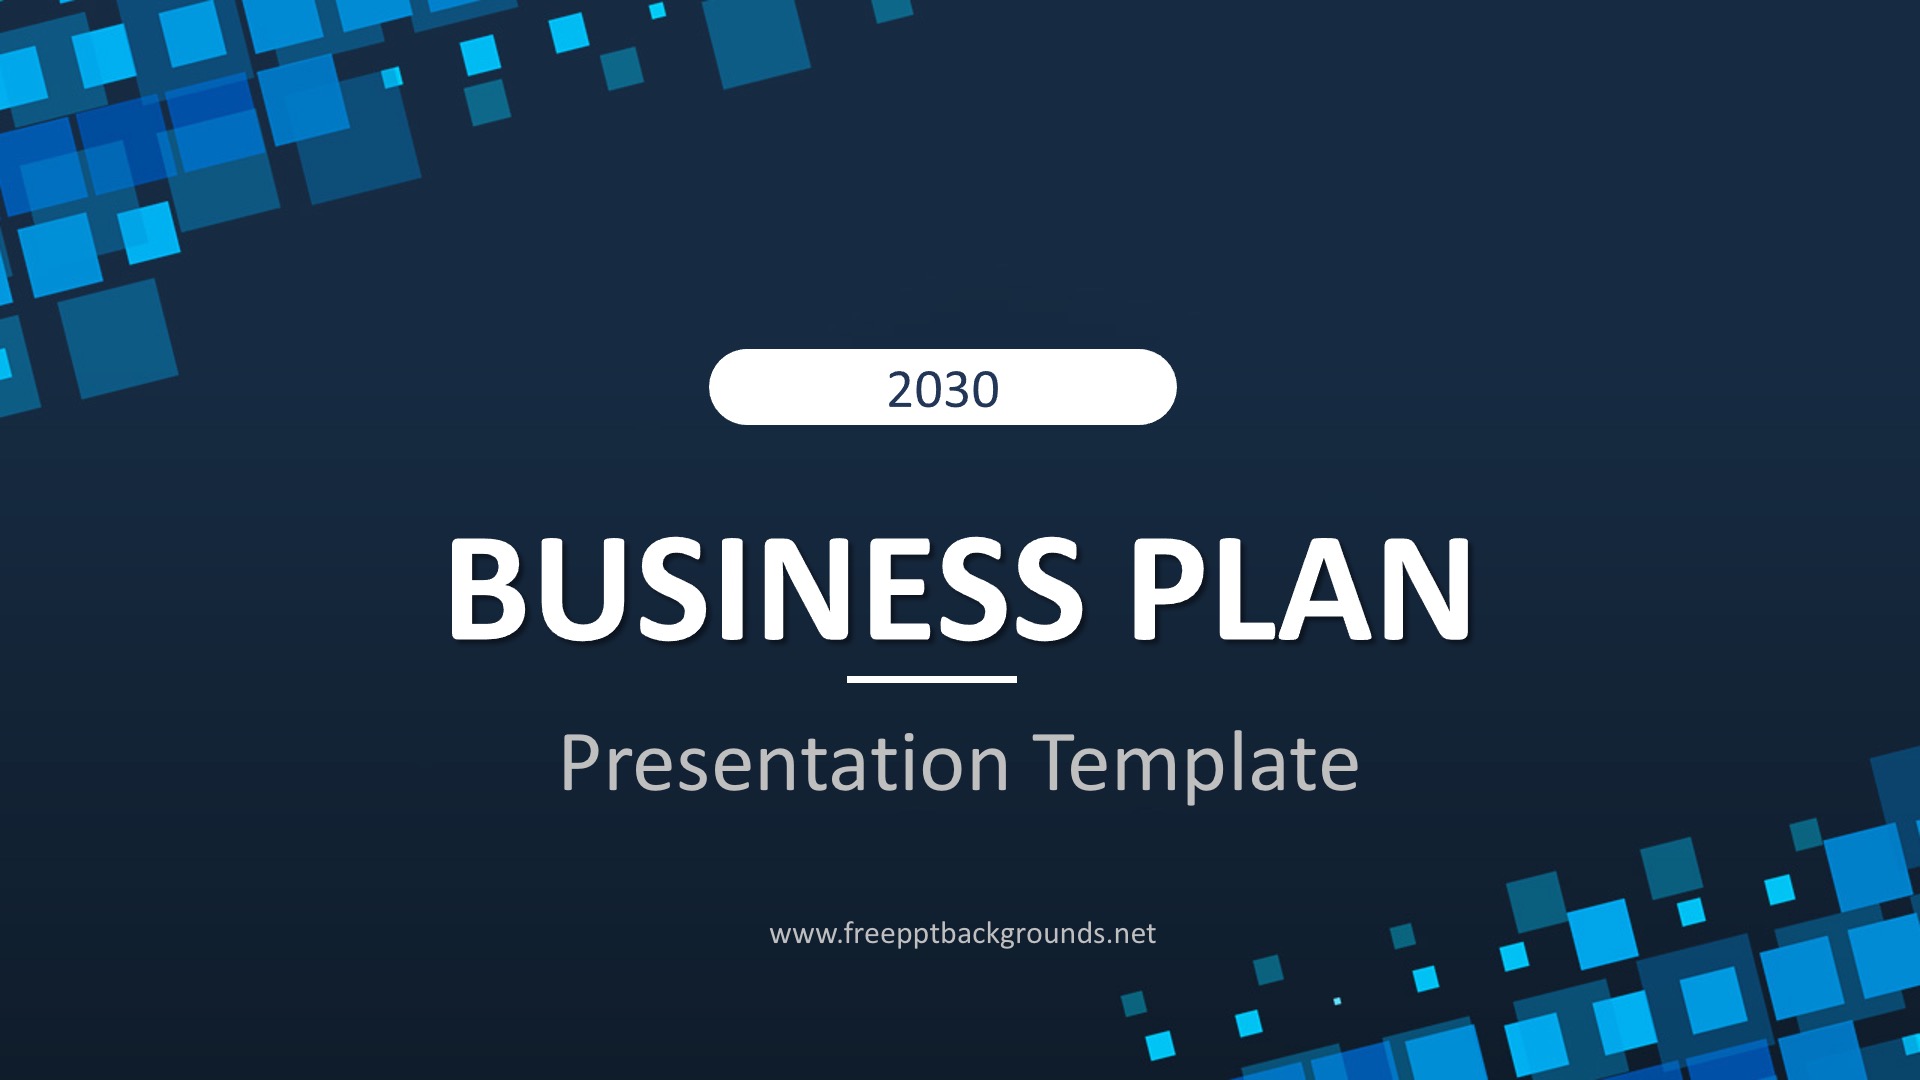 2030 Business Plan Powerpoint Templates - Blue, Business & Finance - Free  PPT Backgrounds and Templates